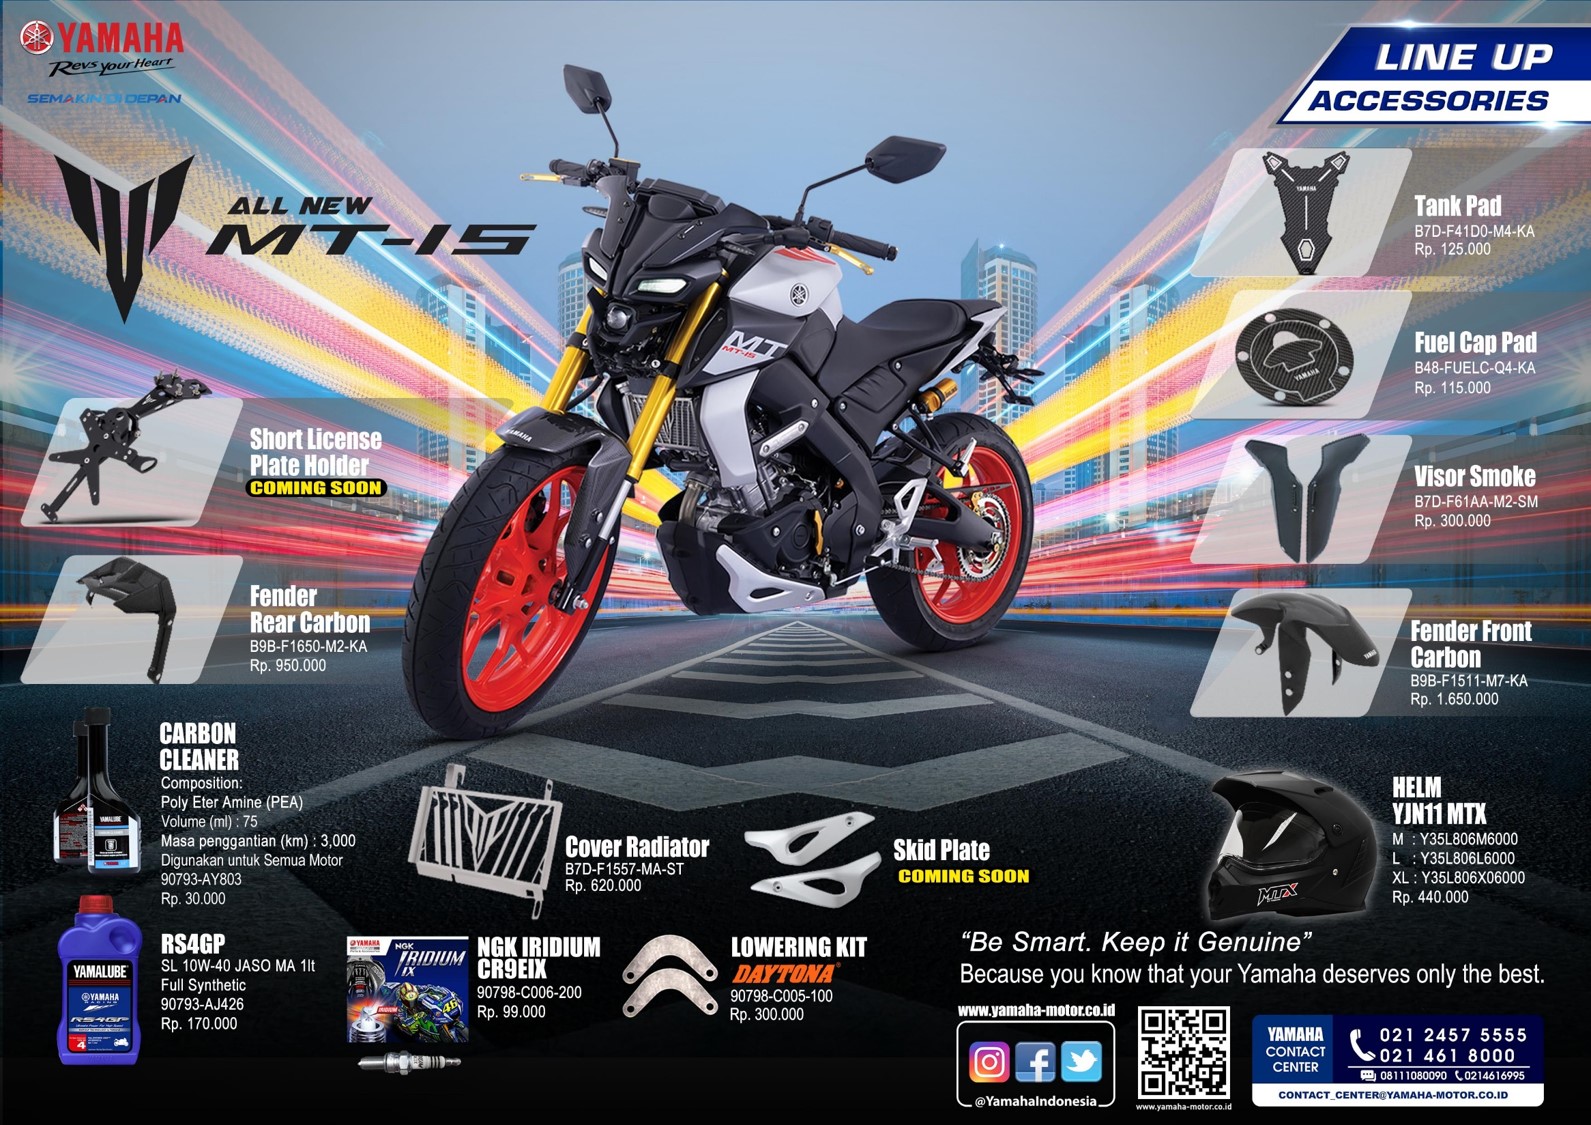 : Indonesia gets Yamaha MT 15 accessories - Adrenaline Culture of Speed